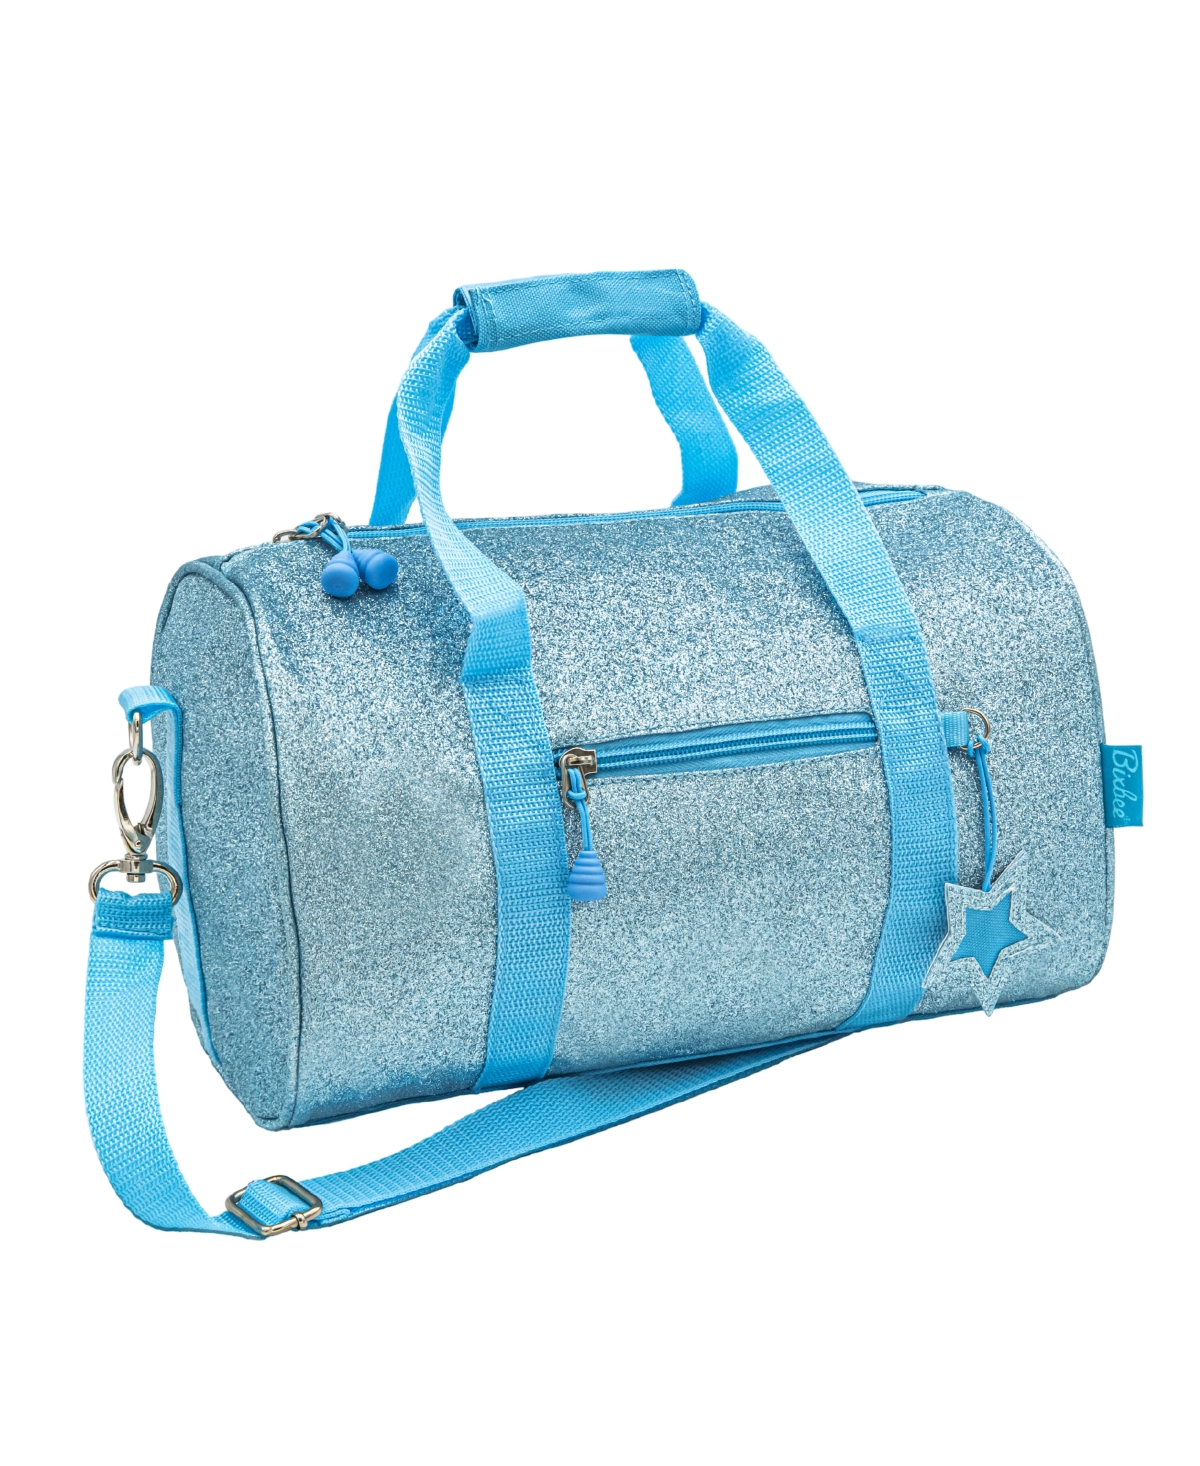 Sparkalicious Turquoise Duffle Bag - Turquoise